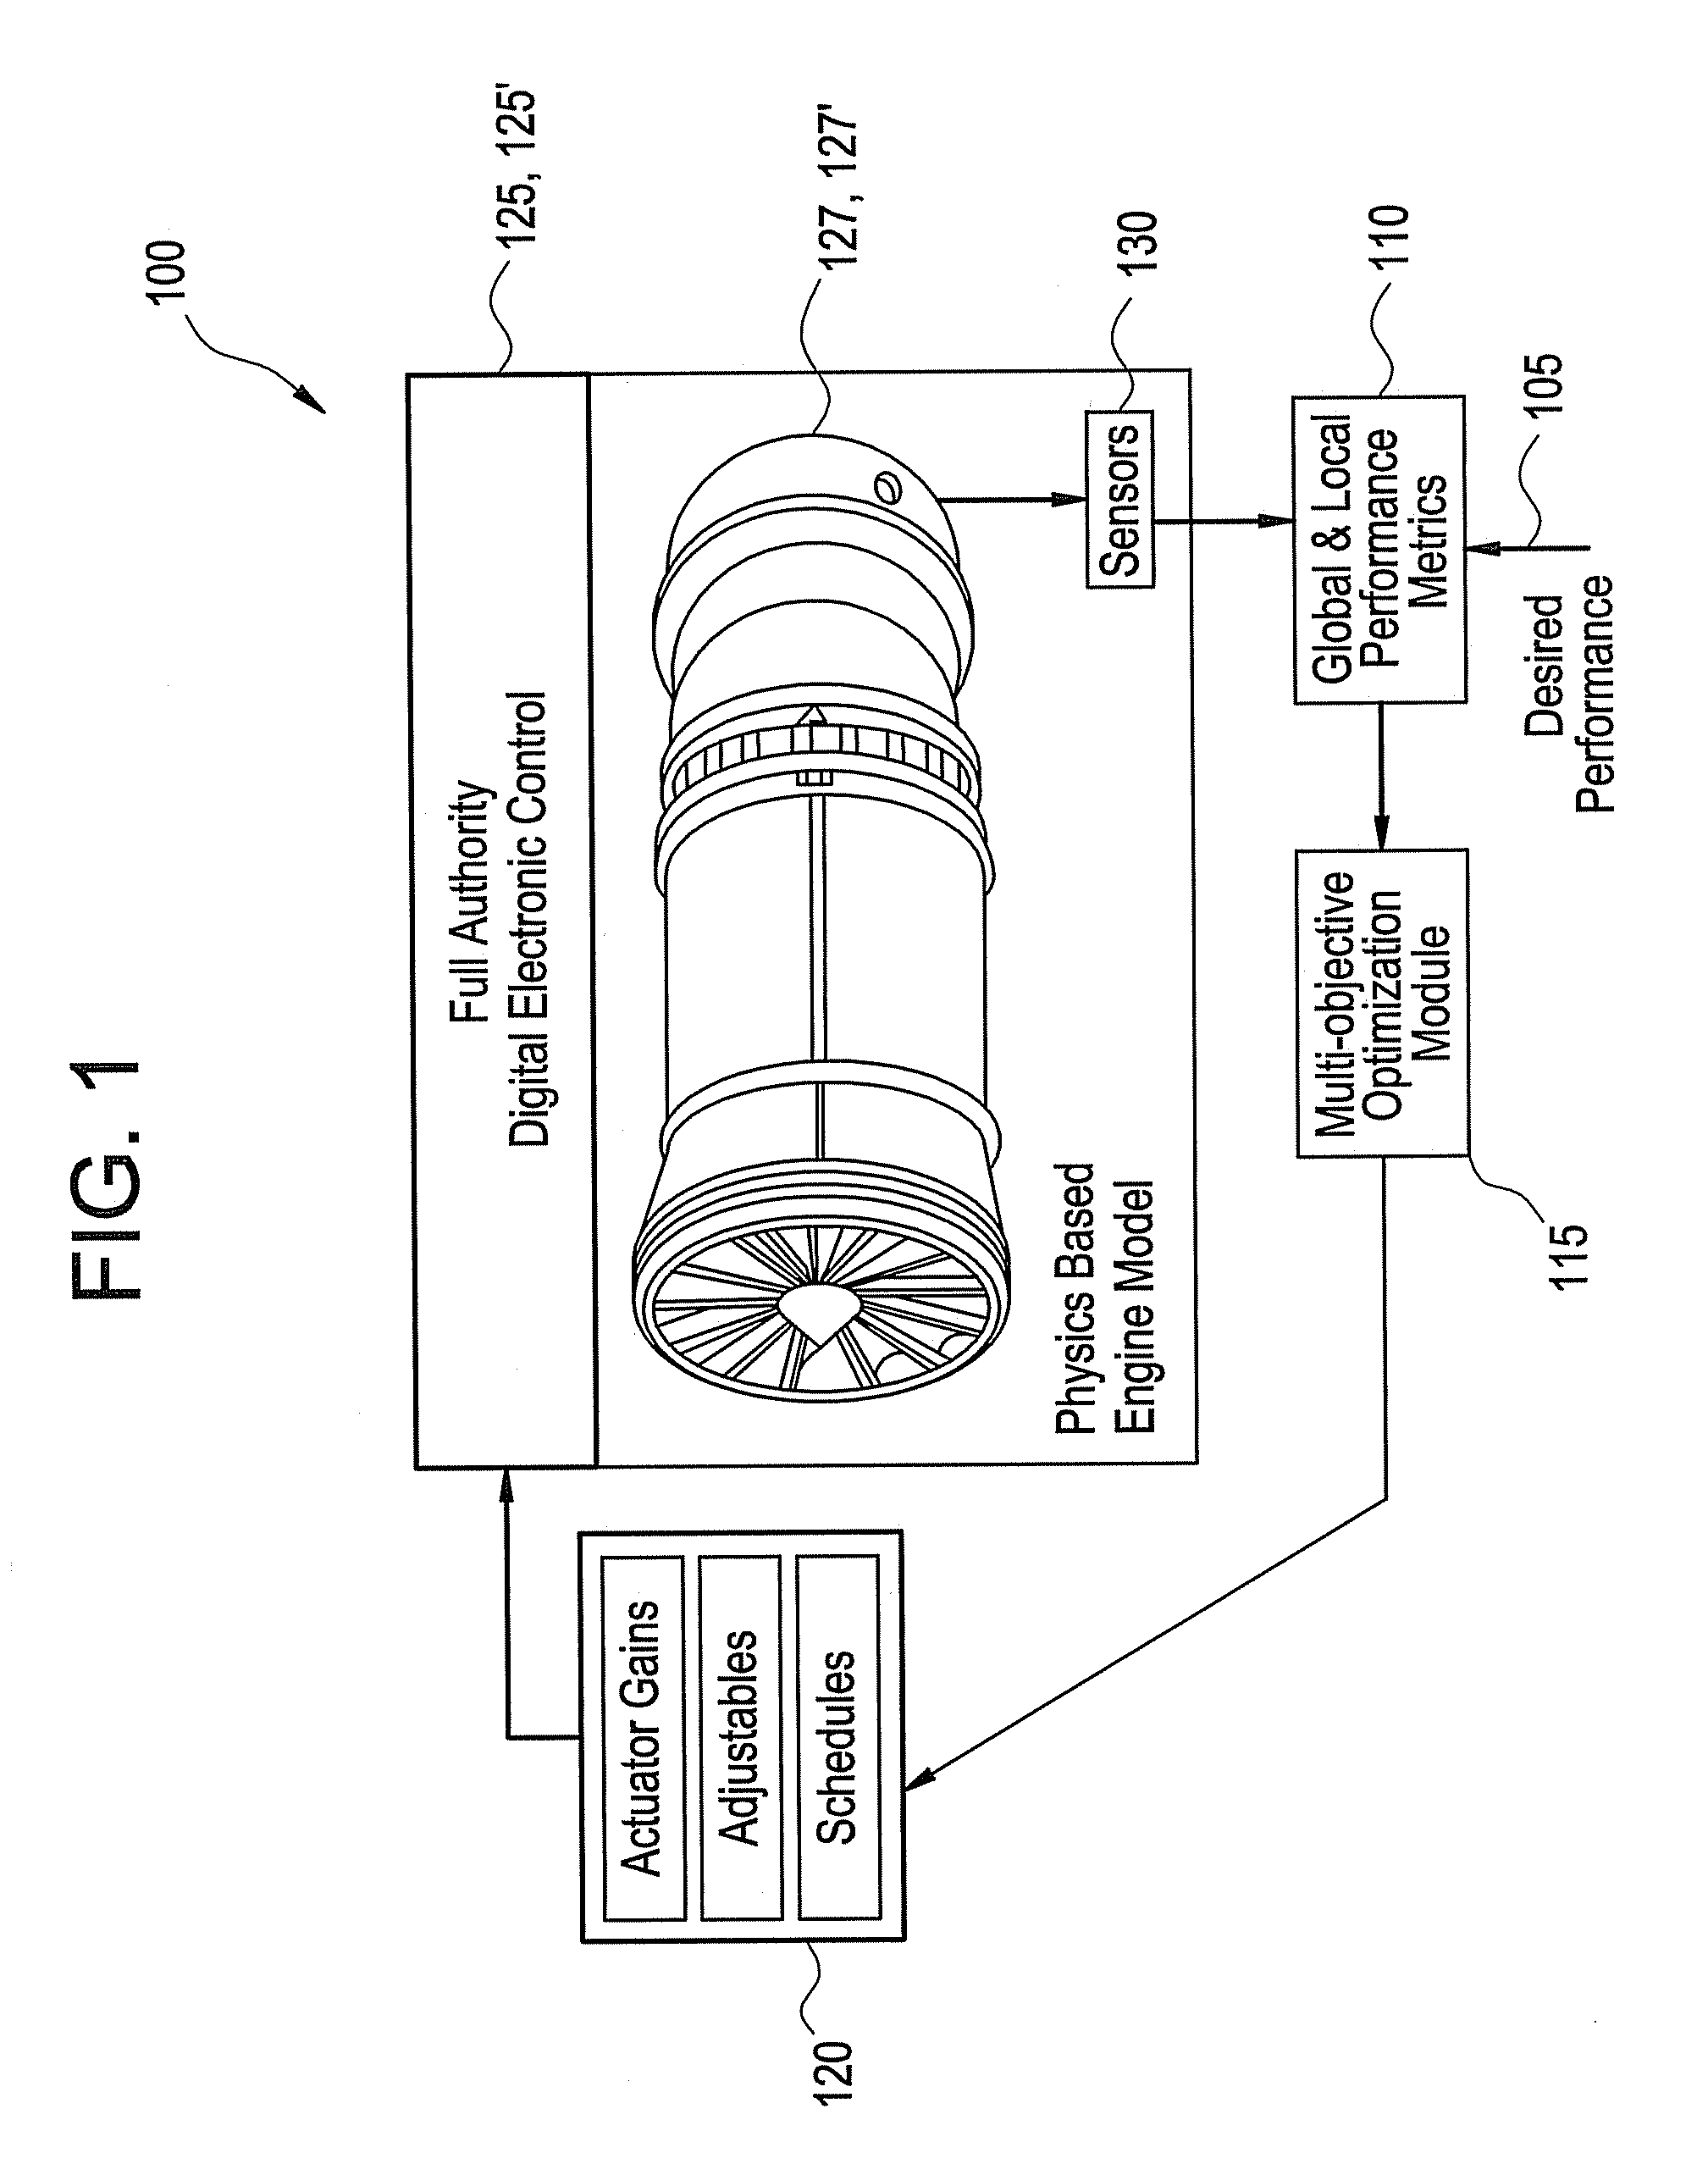 Method and system for fault accommodation of machines